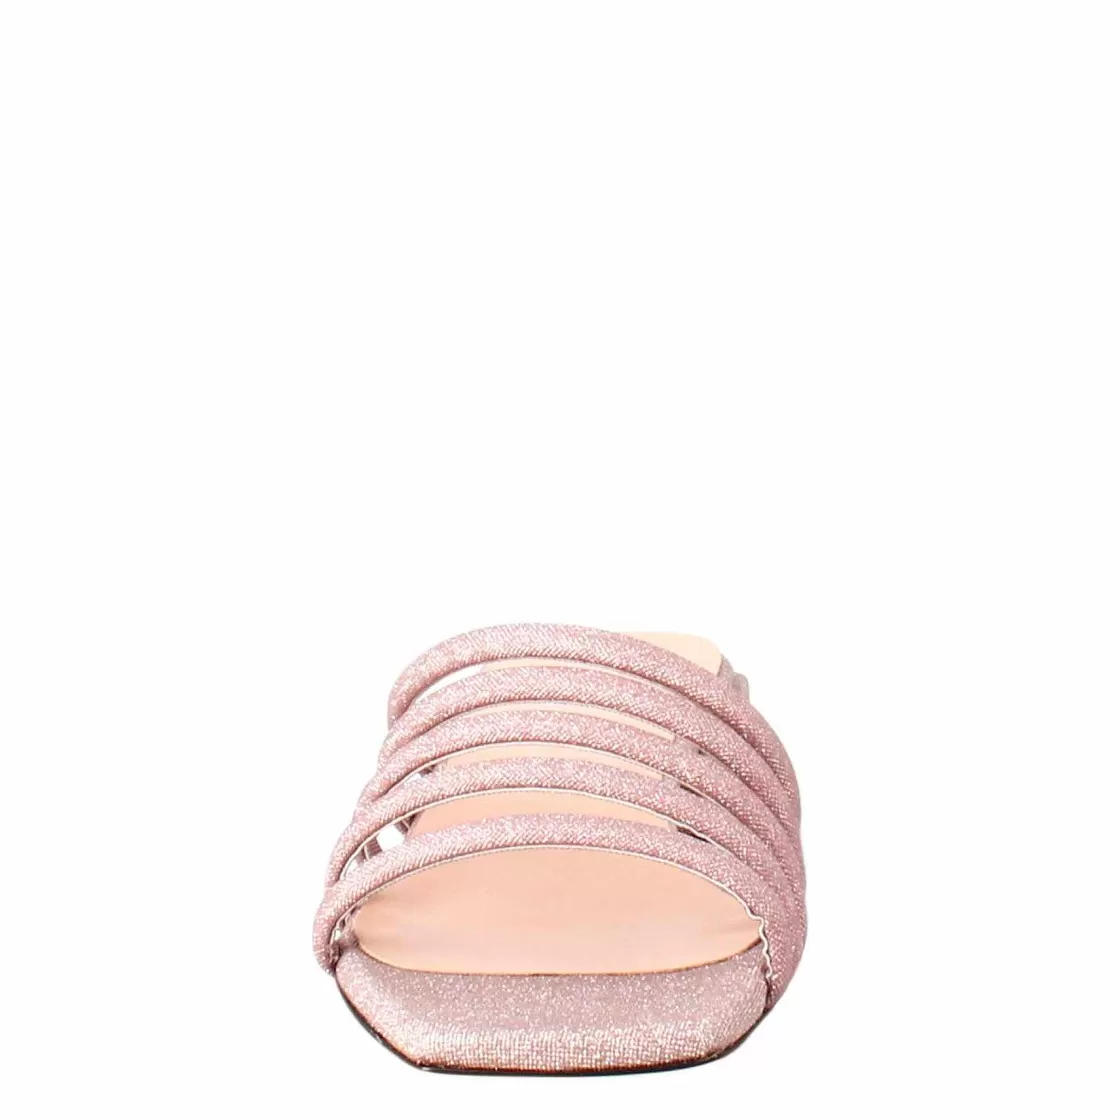 Leonardo Square-Shaped Women'S Sandal In Pink Leather With Glitter Flash Sale